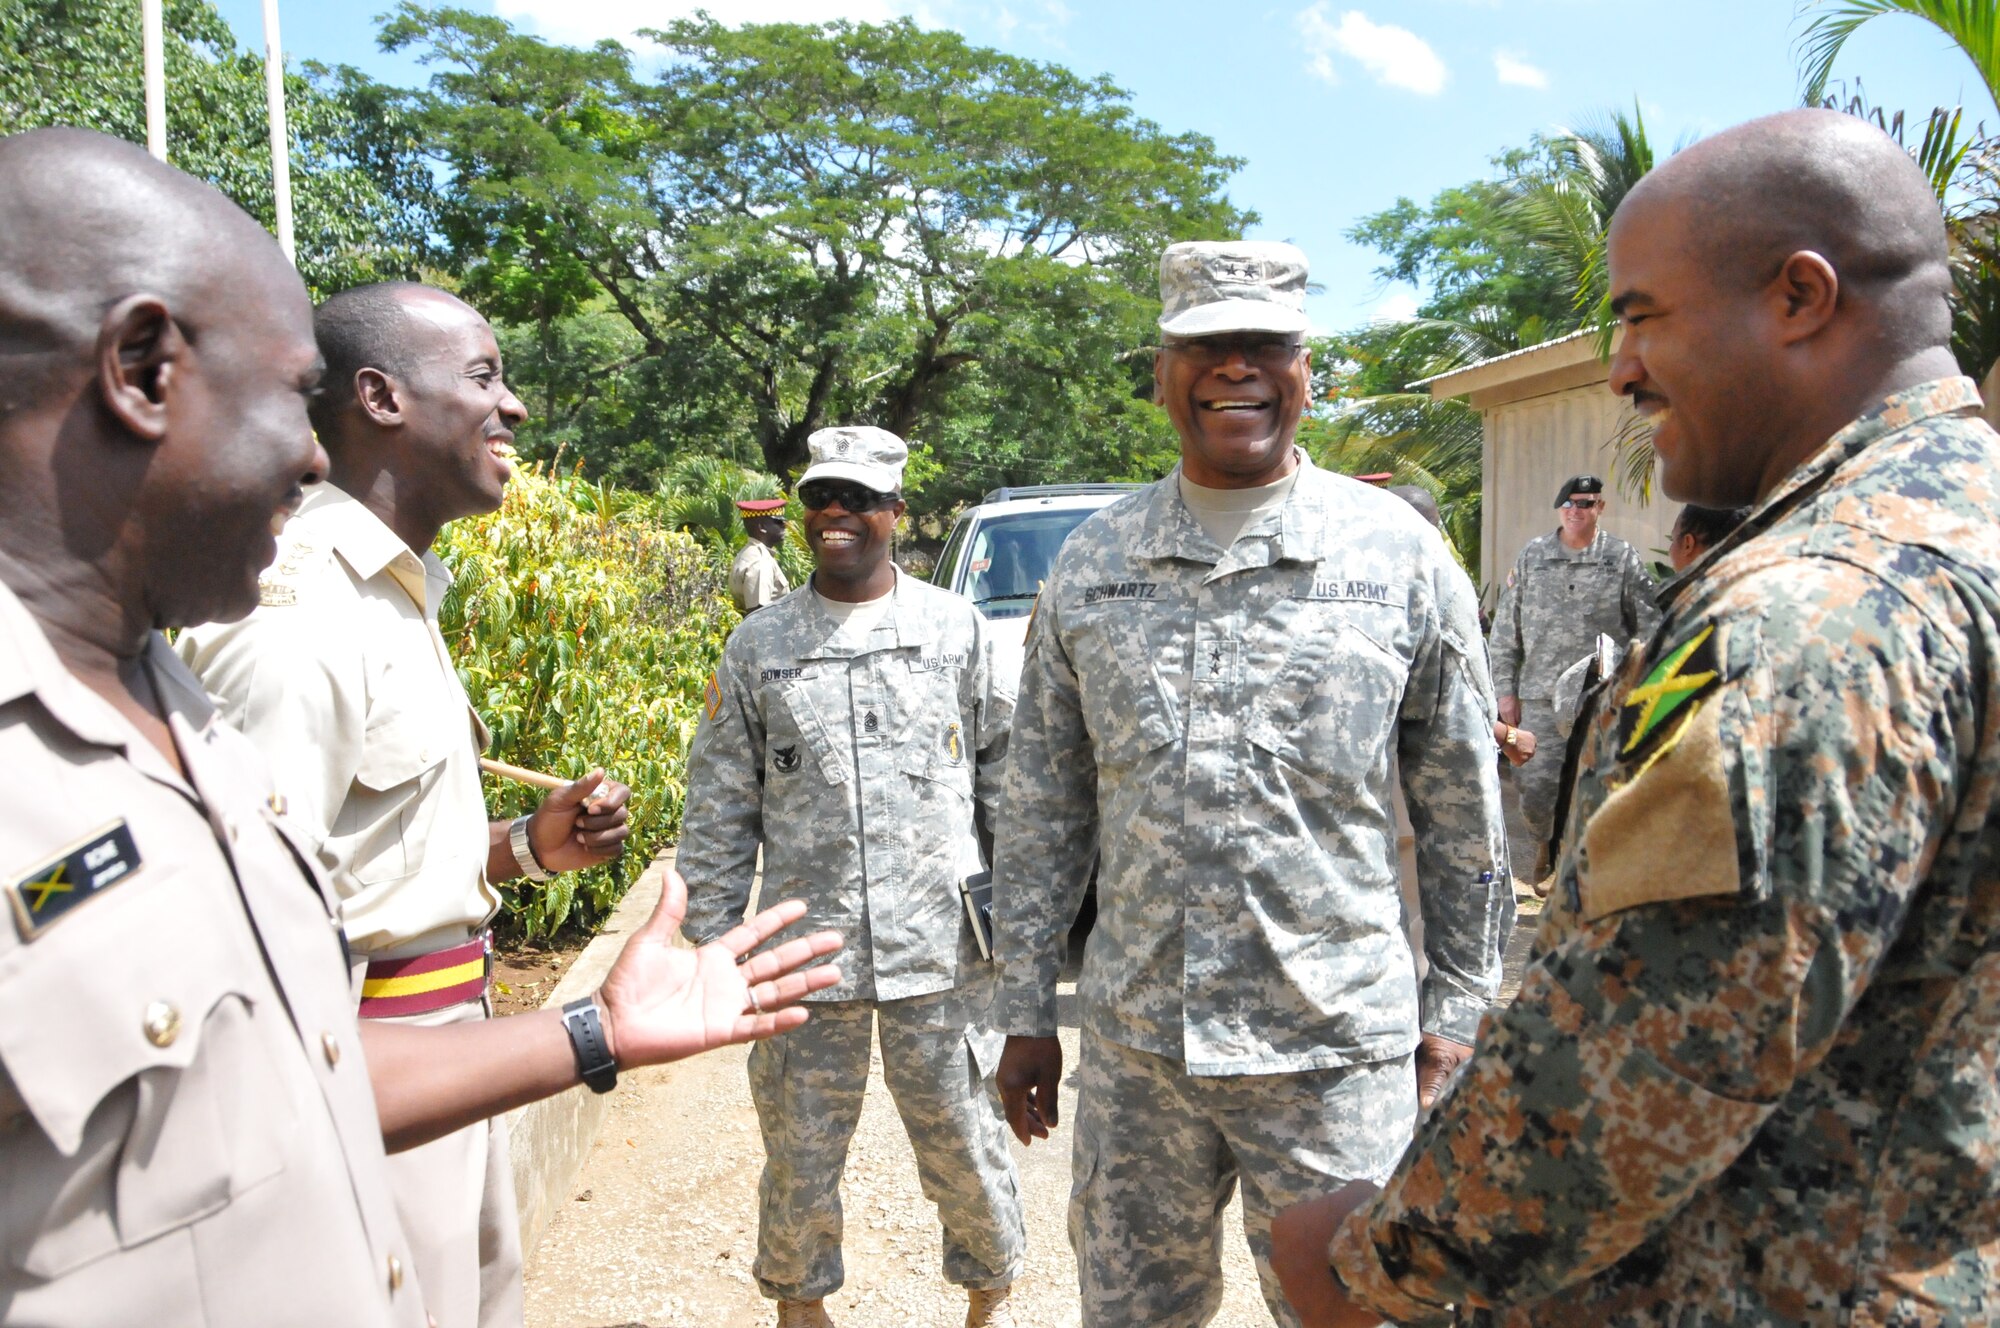 Maj. Gen. Errol Schwartz, Commanding General of the District of Columbia National Guard, speaks with members of the Jamaica Defense Force at the Moneague Training Base, Moneague, Jamaica, Aug. 19. (U.S. Air National Guard photo by Senior Airman Sumeana Leslie)